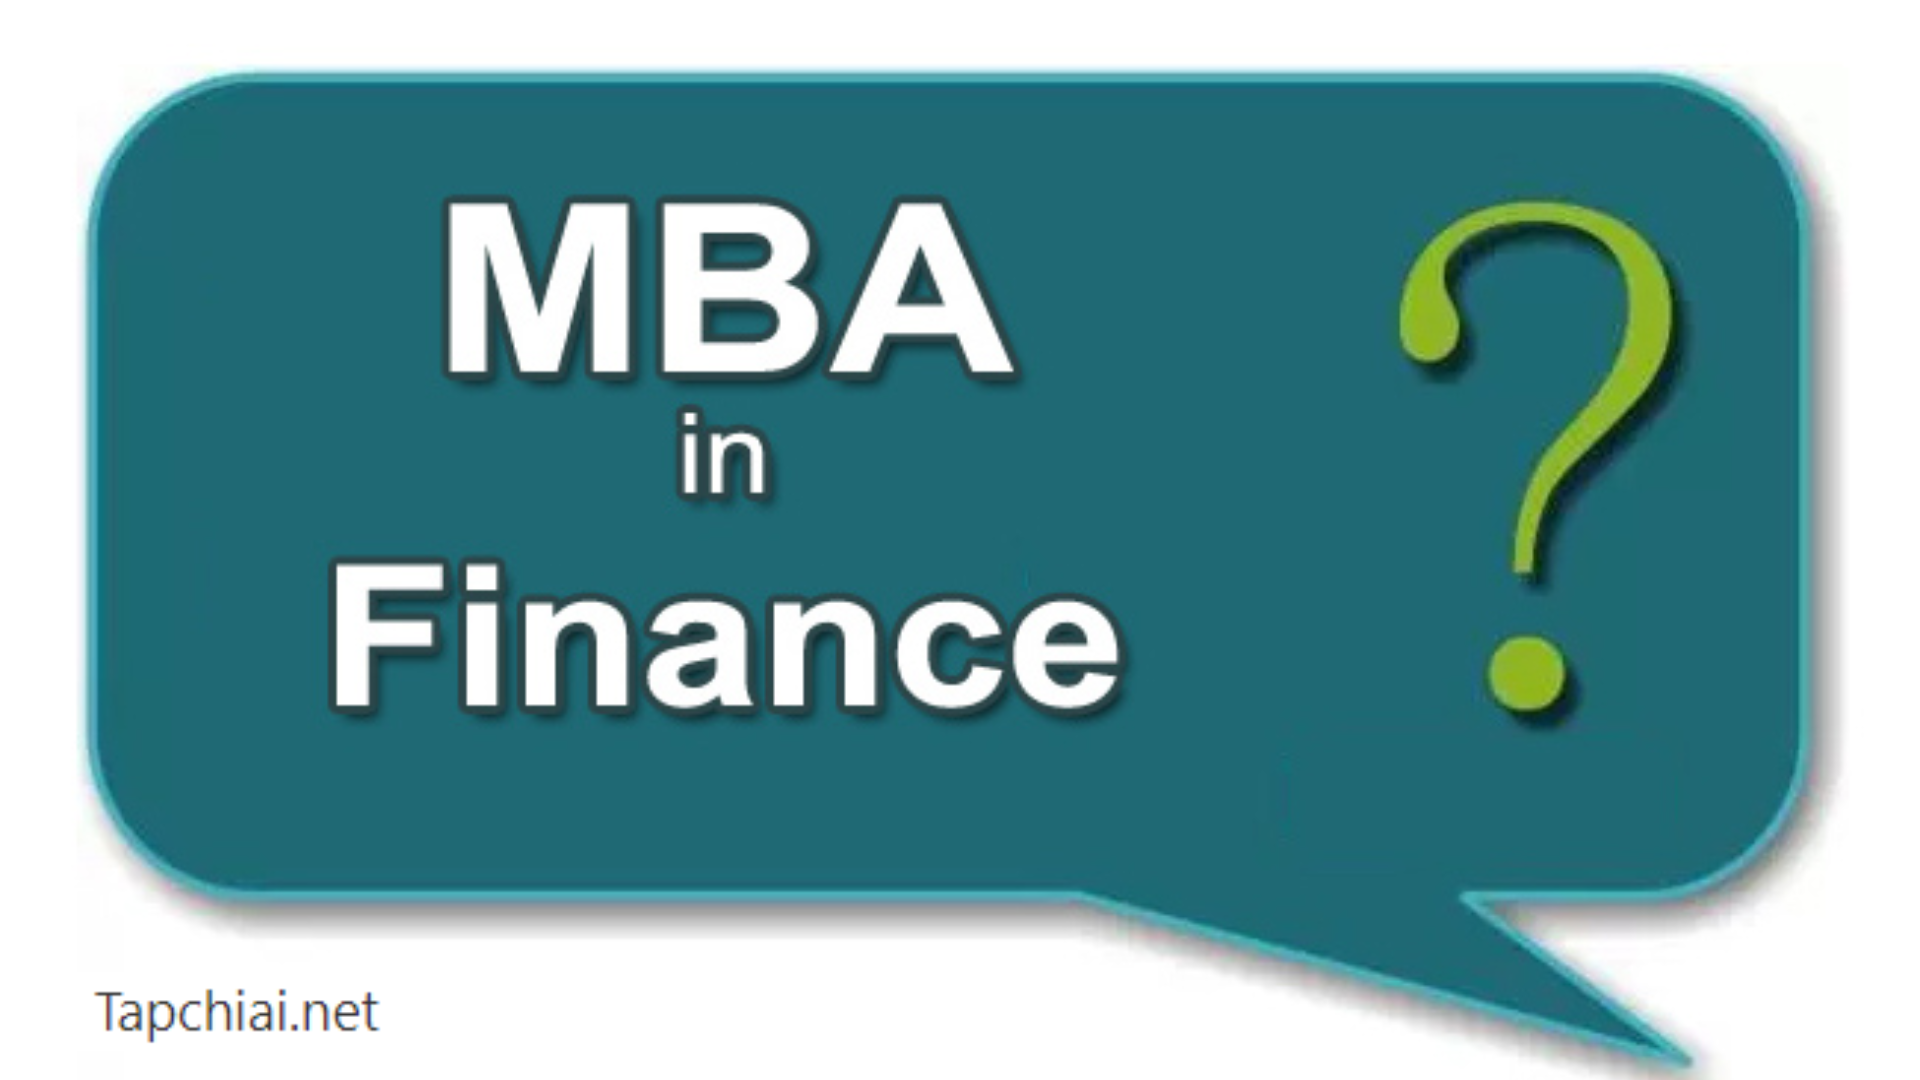 What is a Finance MBA Program?